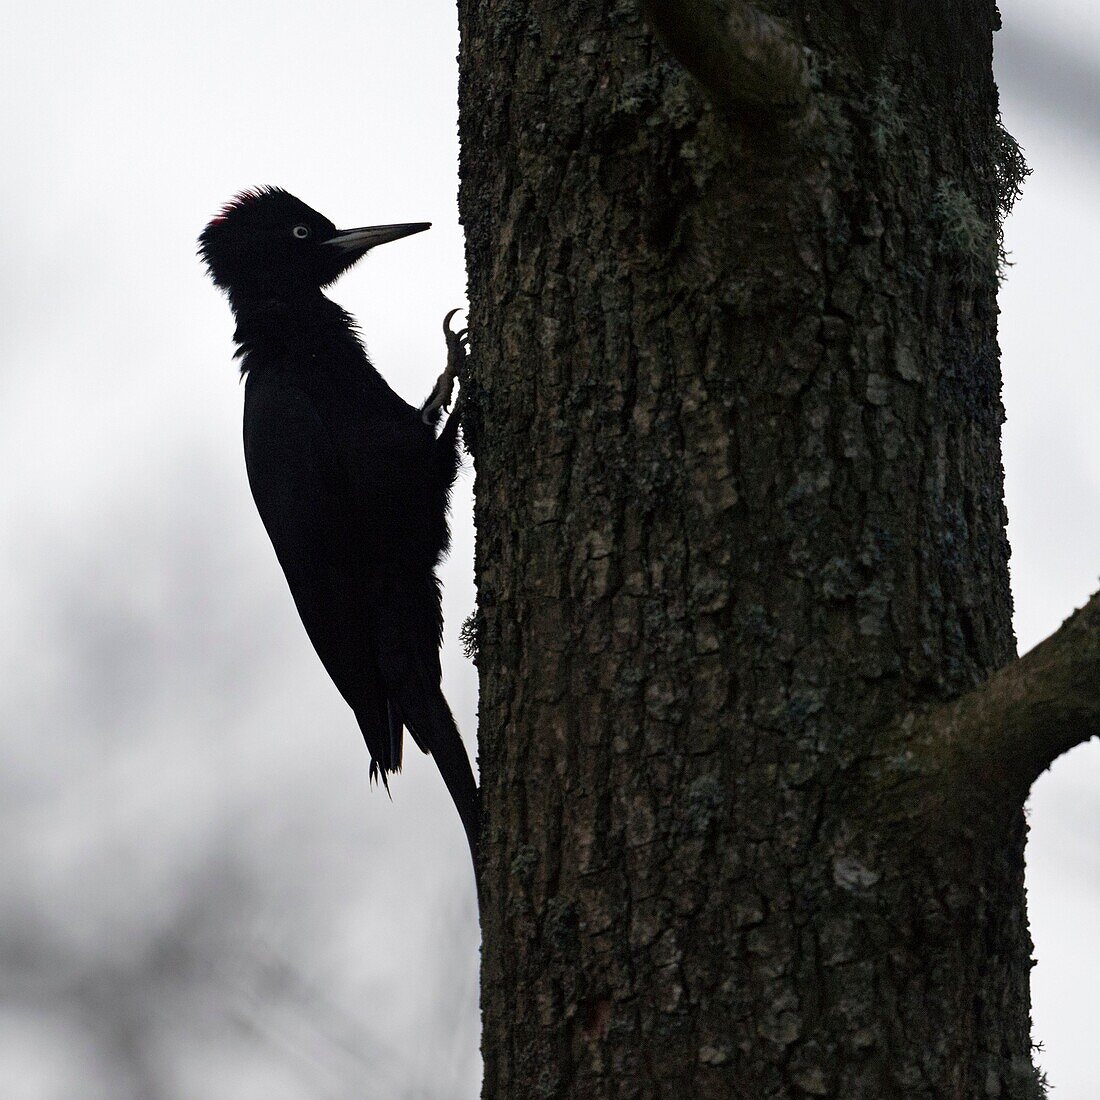 Black Woodpecker ( Dryocopus martius ) perched on a tree trunk, climbing up, searching for food, silhouetted in backlight, typical pose, silhouette, wildlife, Europe.